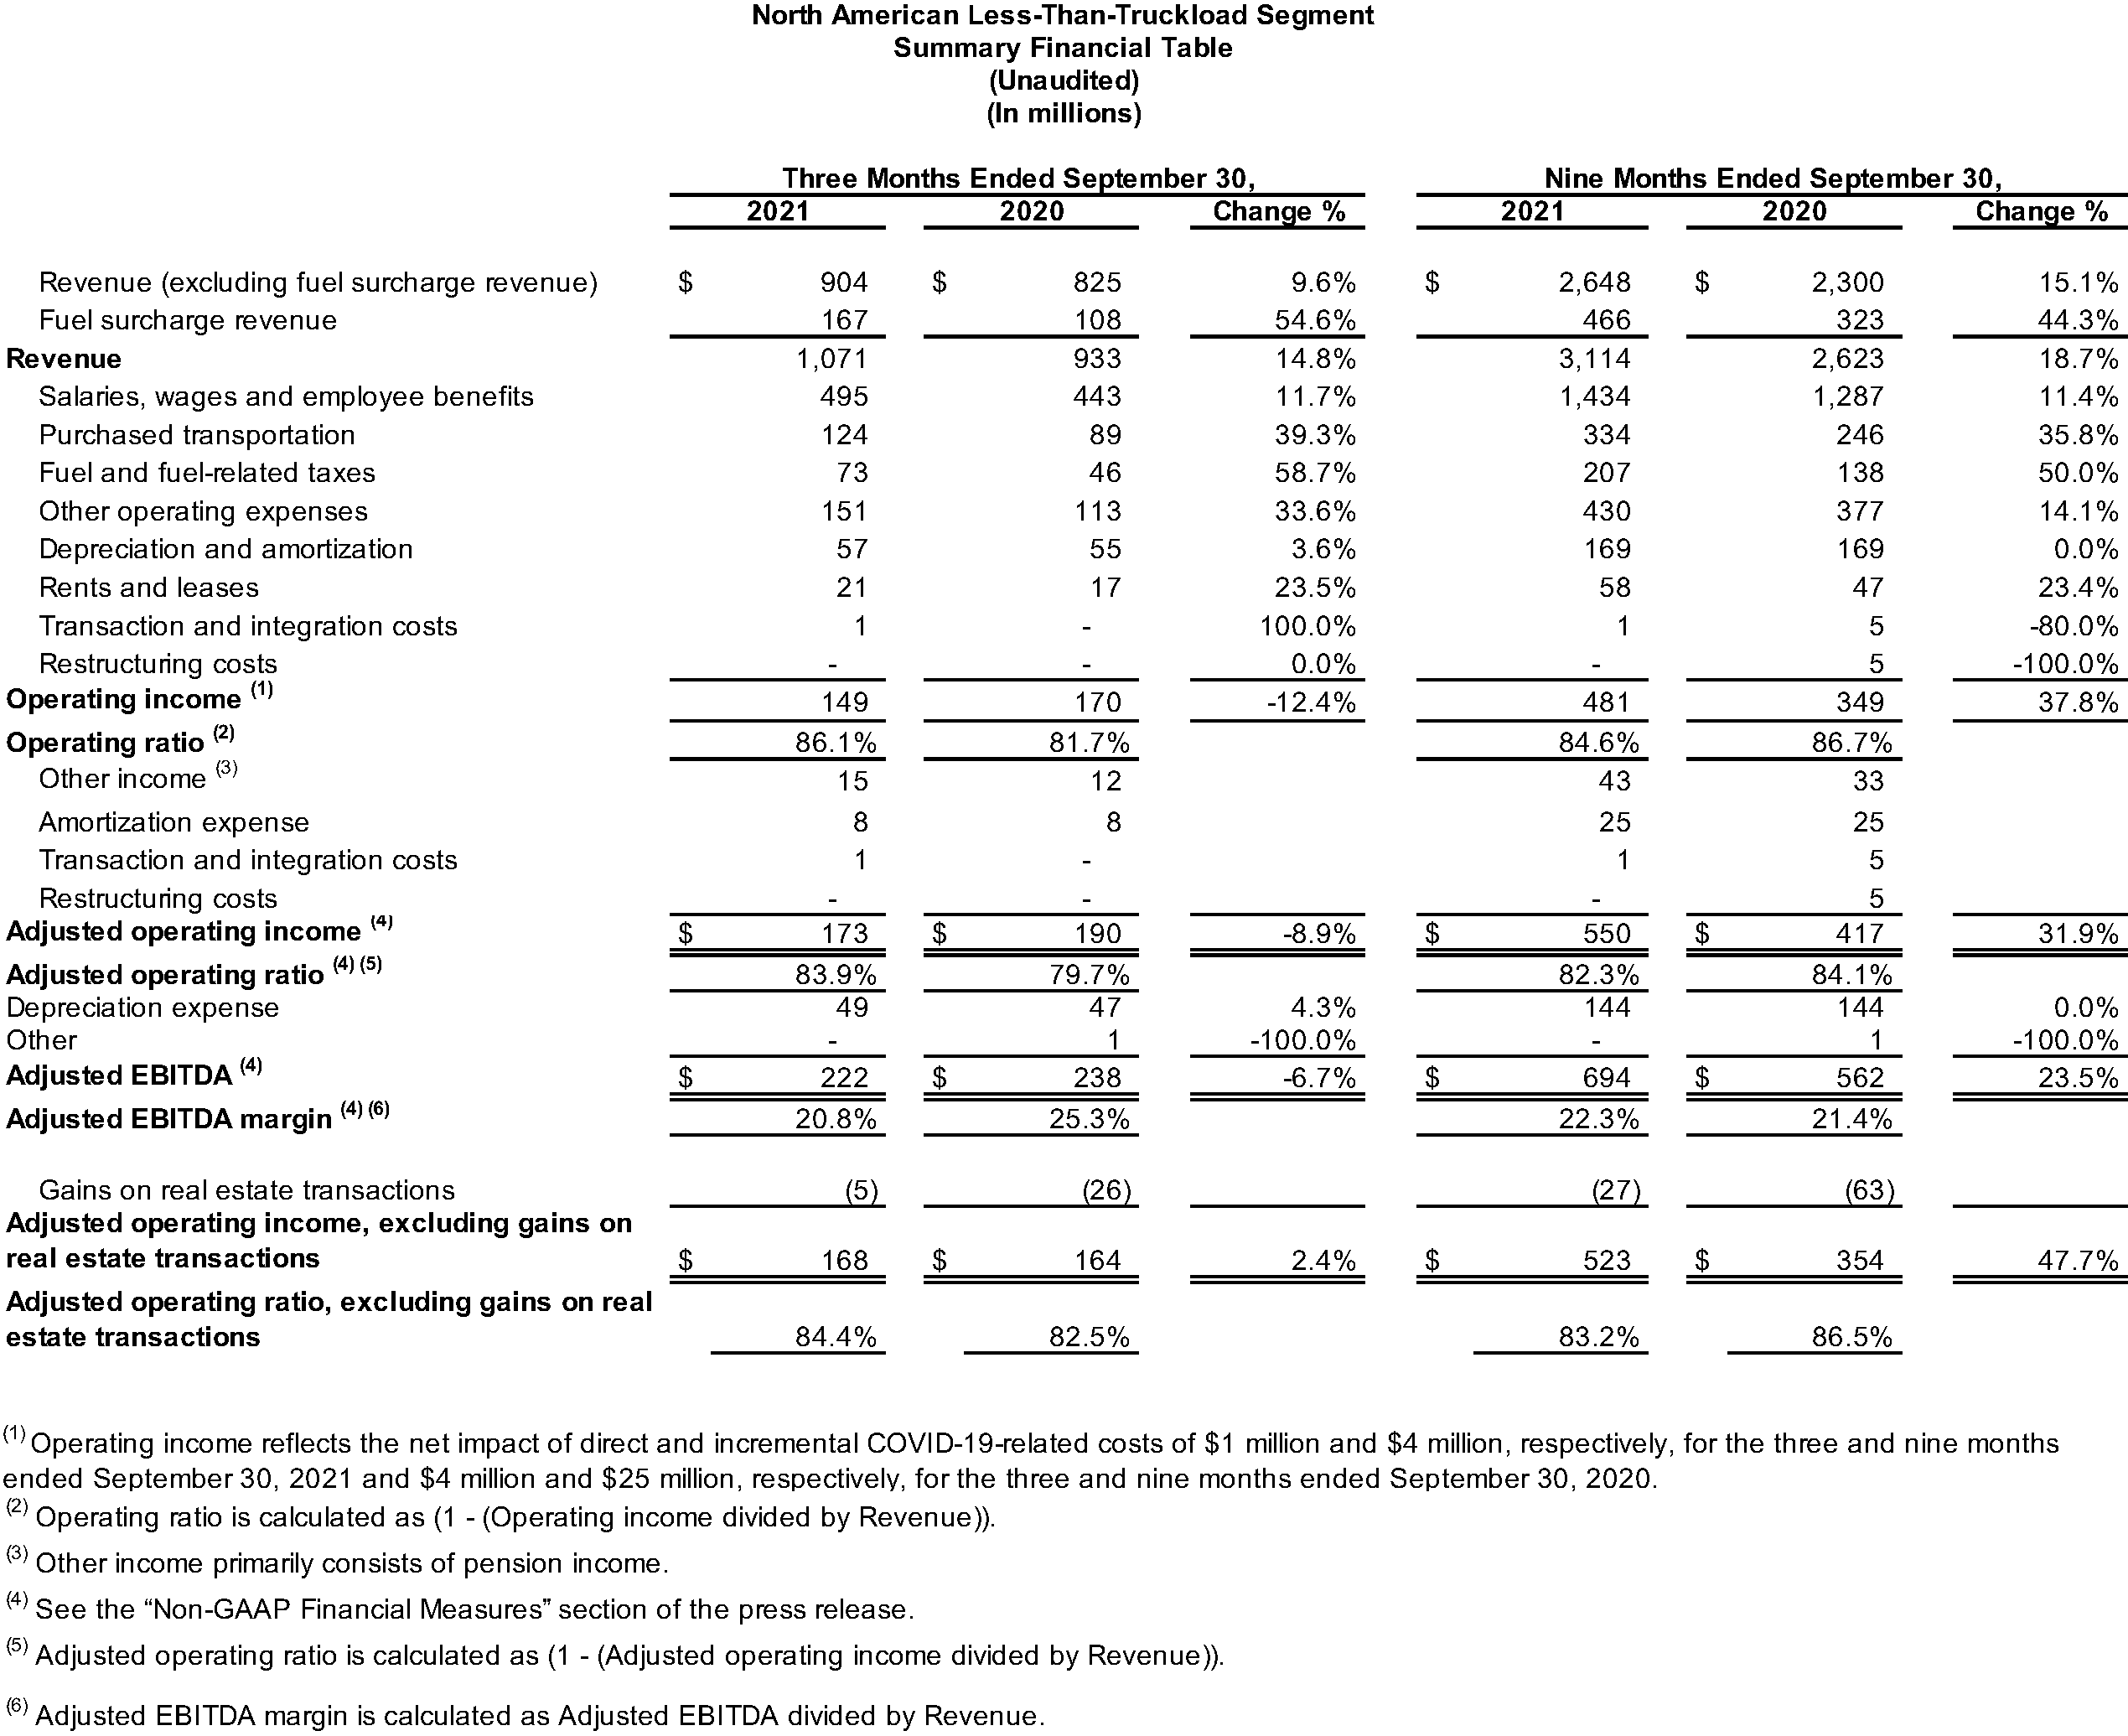 North American Less-Than-Truckload Segment Summary Financial Table (Unaudited)